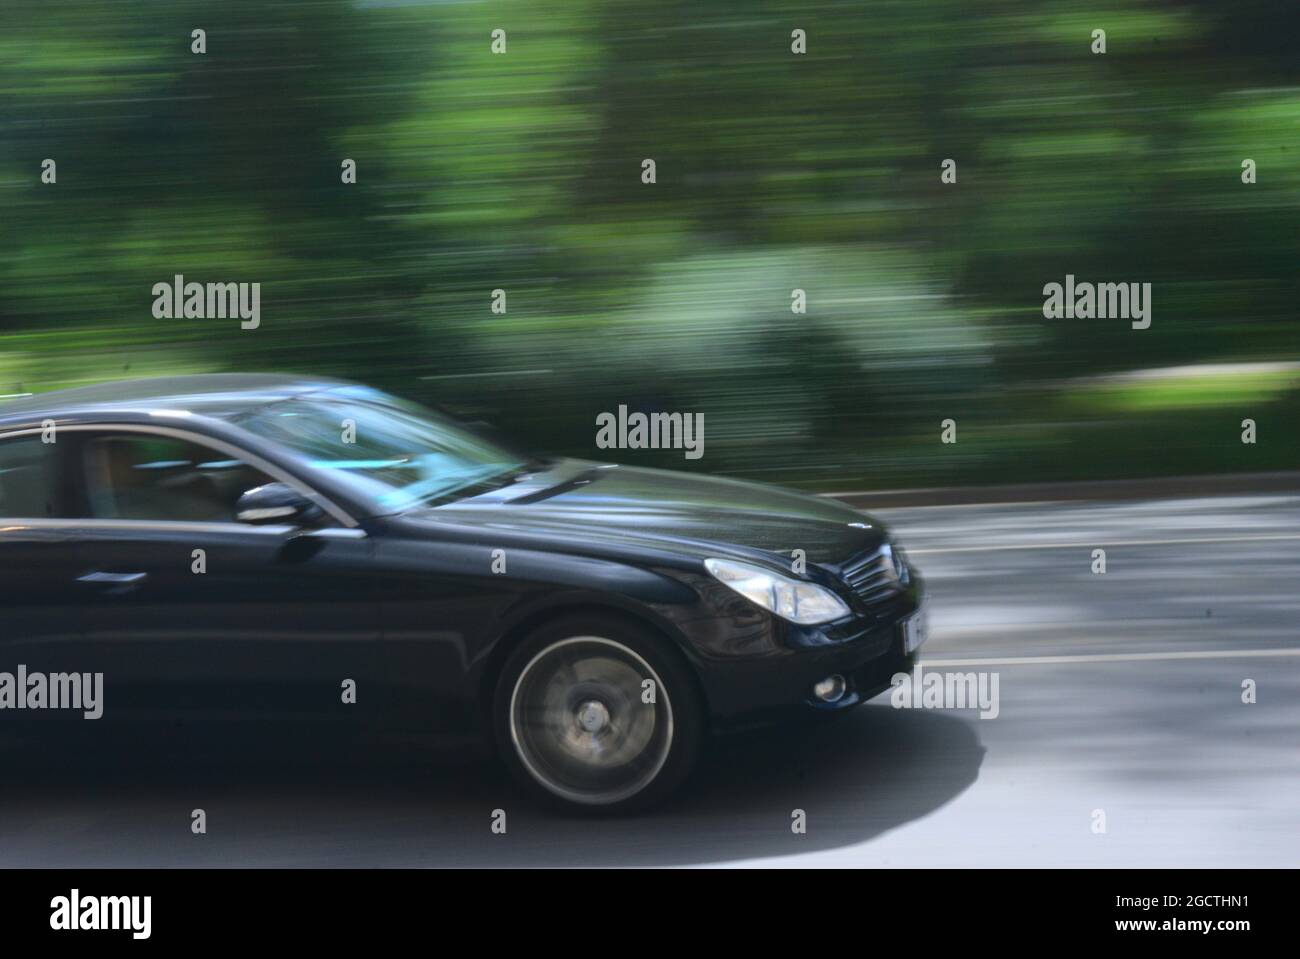 Black Mercedes limousine pacing through the city with a blurred park in the background in Frankfurt, Germany Stock Photo